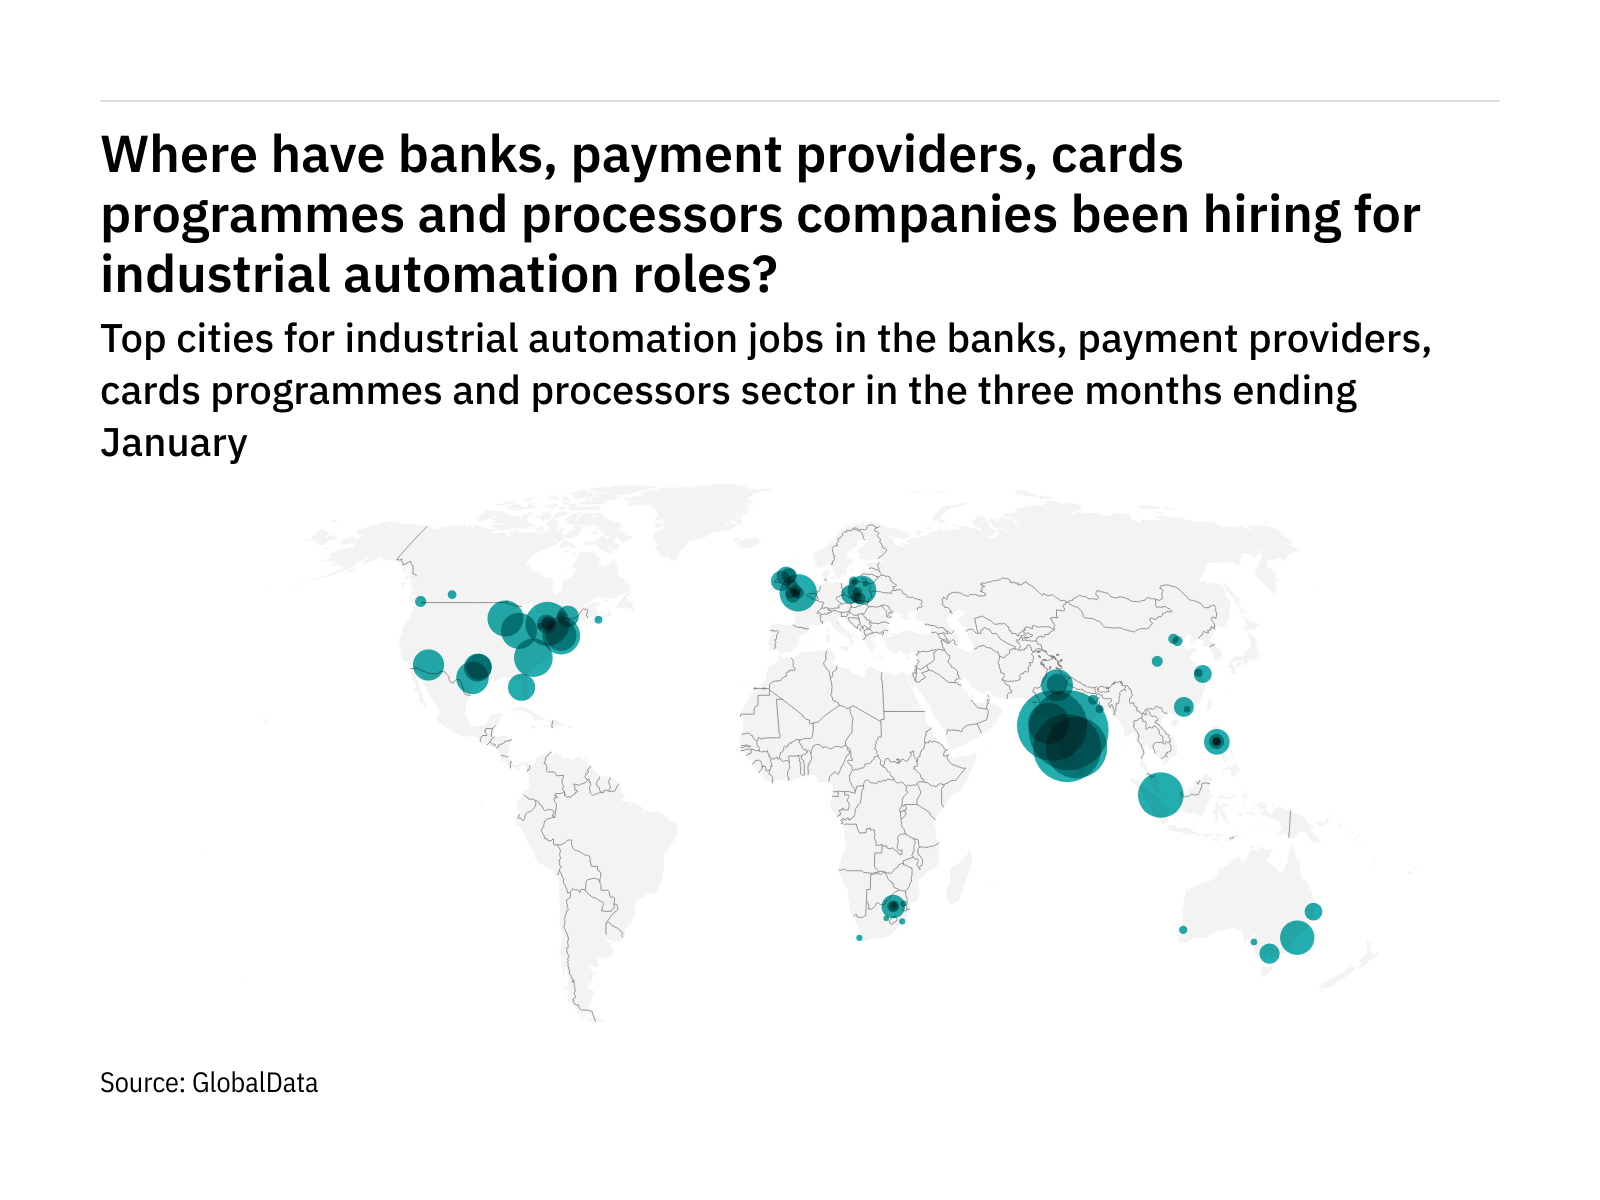 North America is seeing a hiring boom in payment industry industrial automation roles